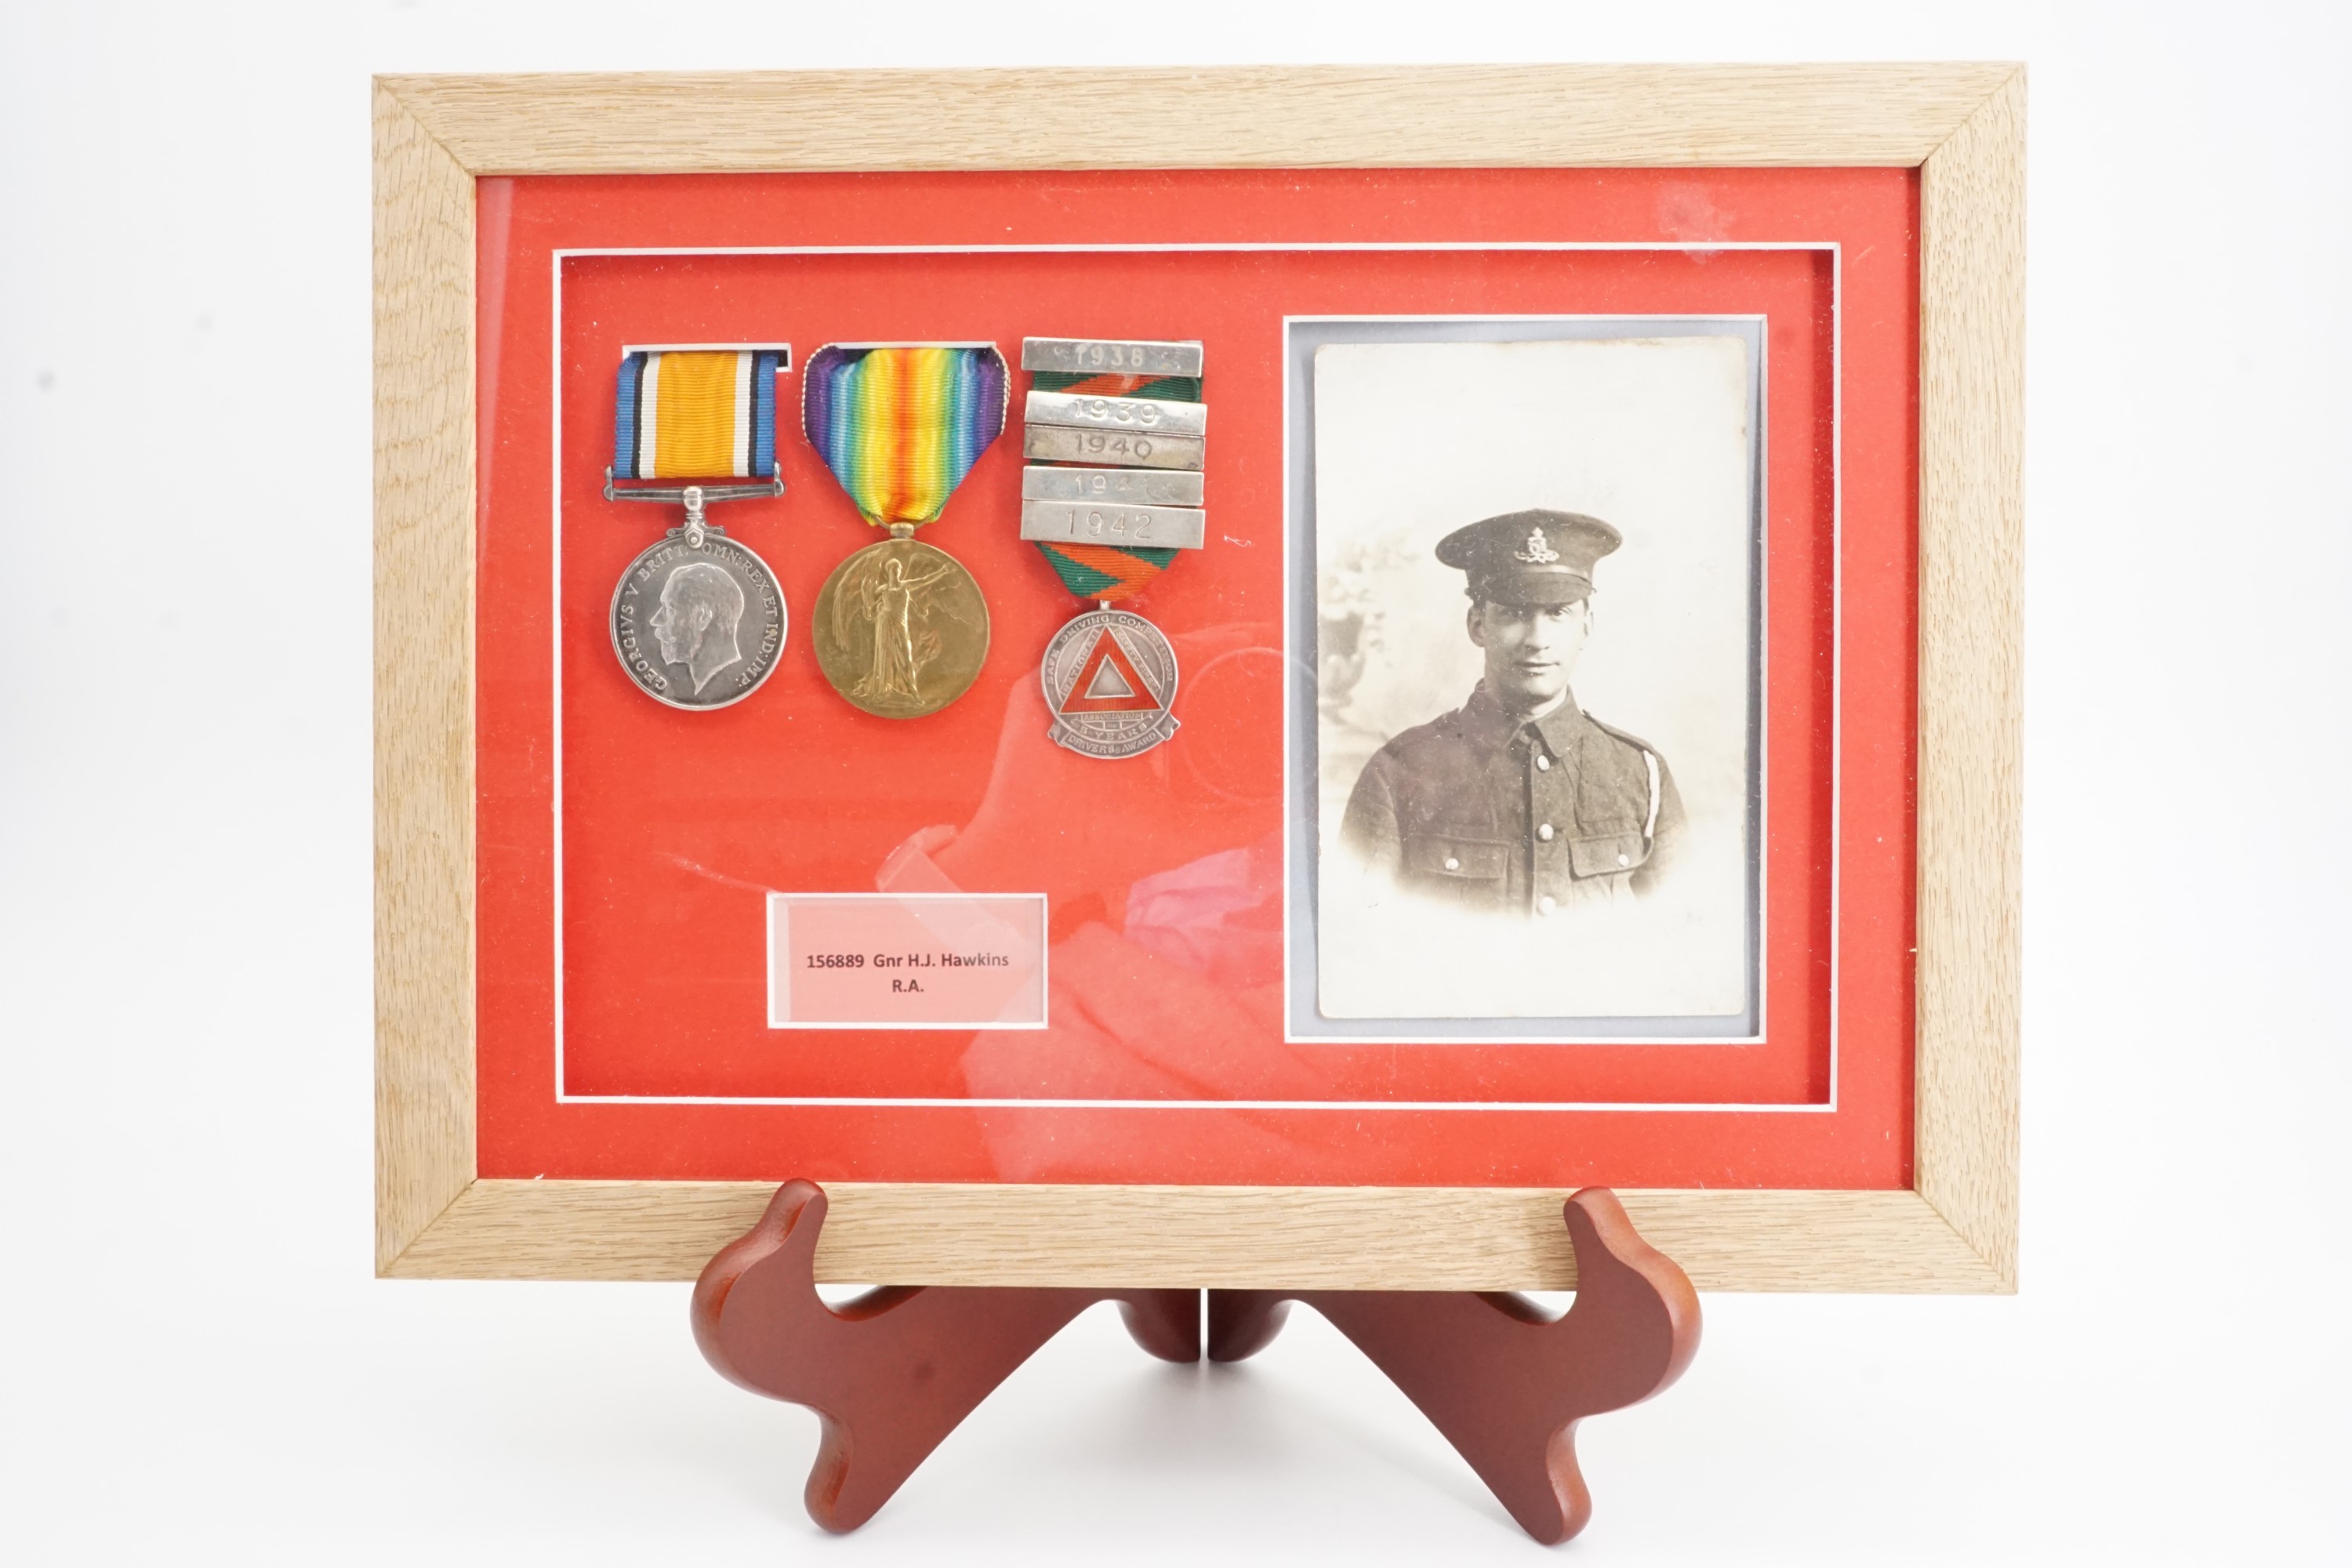 Framed British War and Victory medals together with a driving medal to 156889 Gnr H J Hawkins, RA